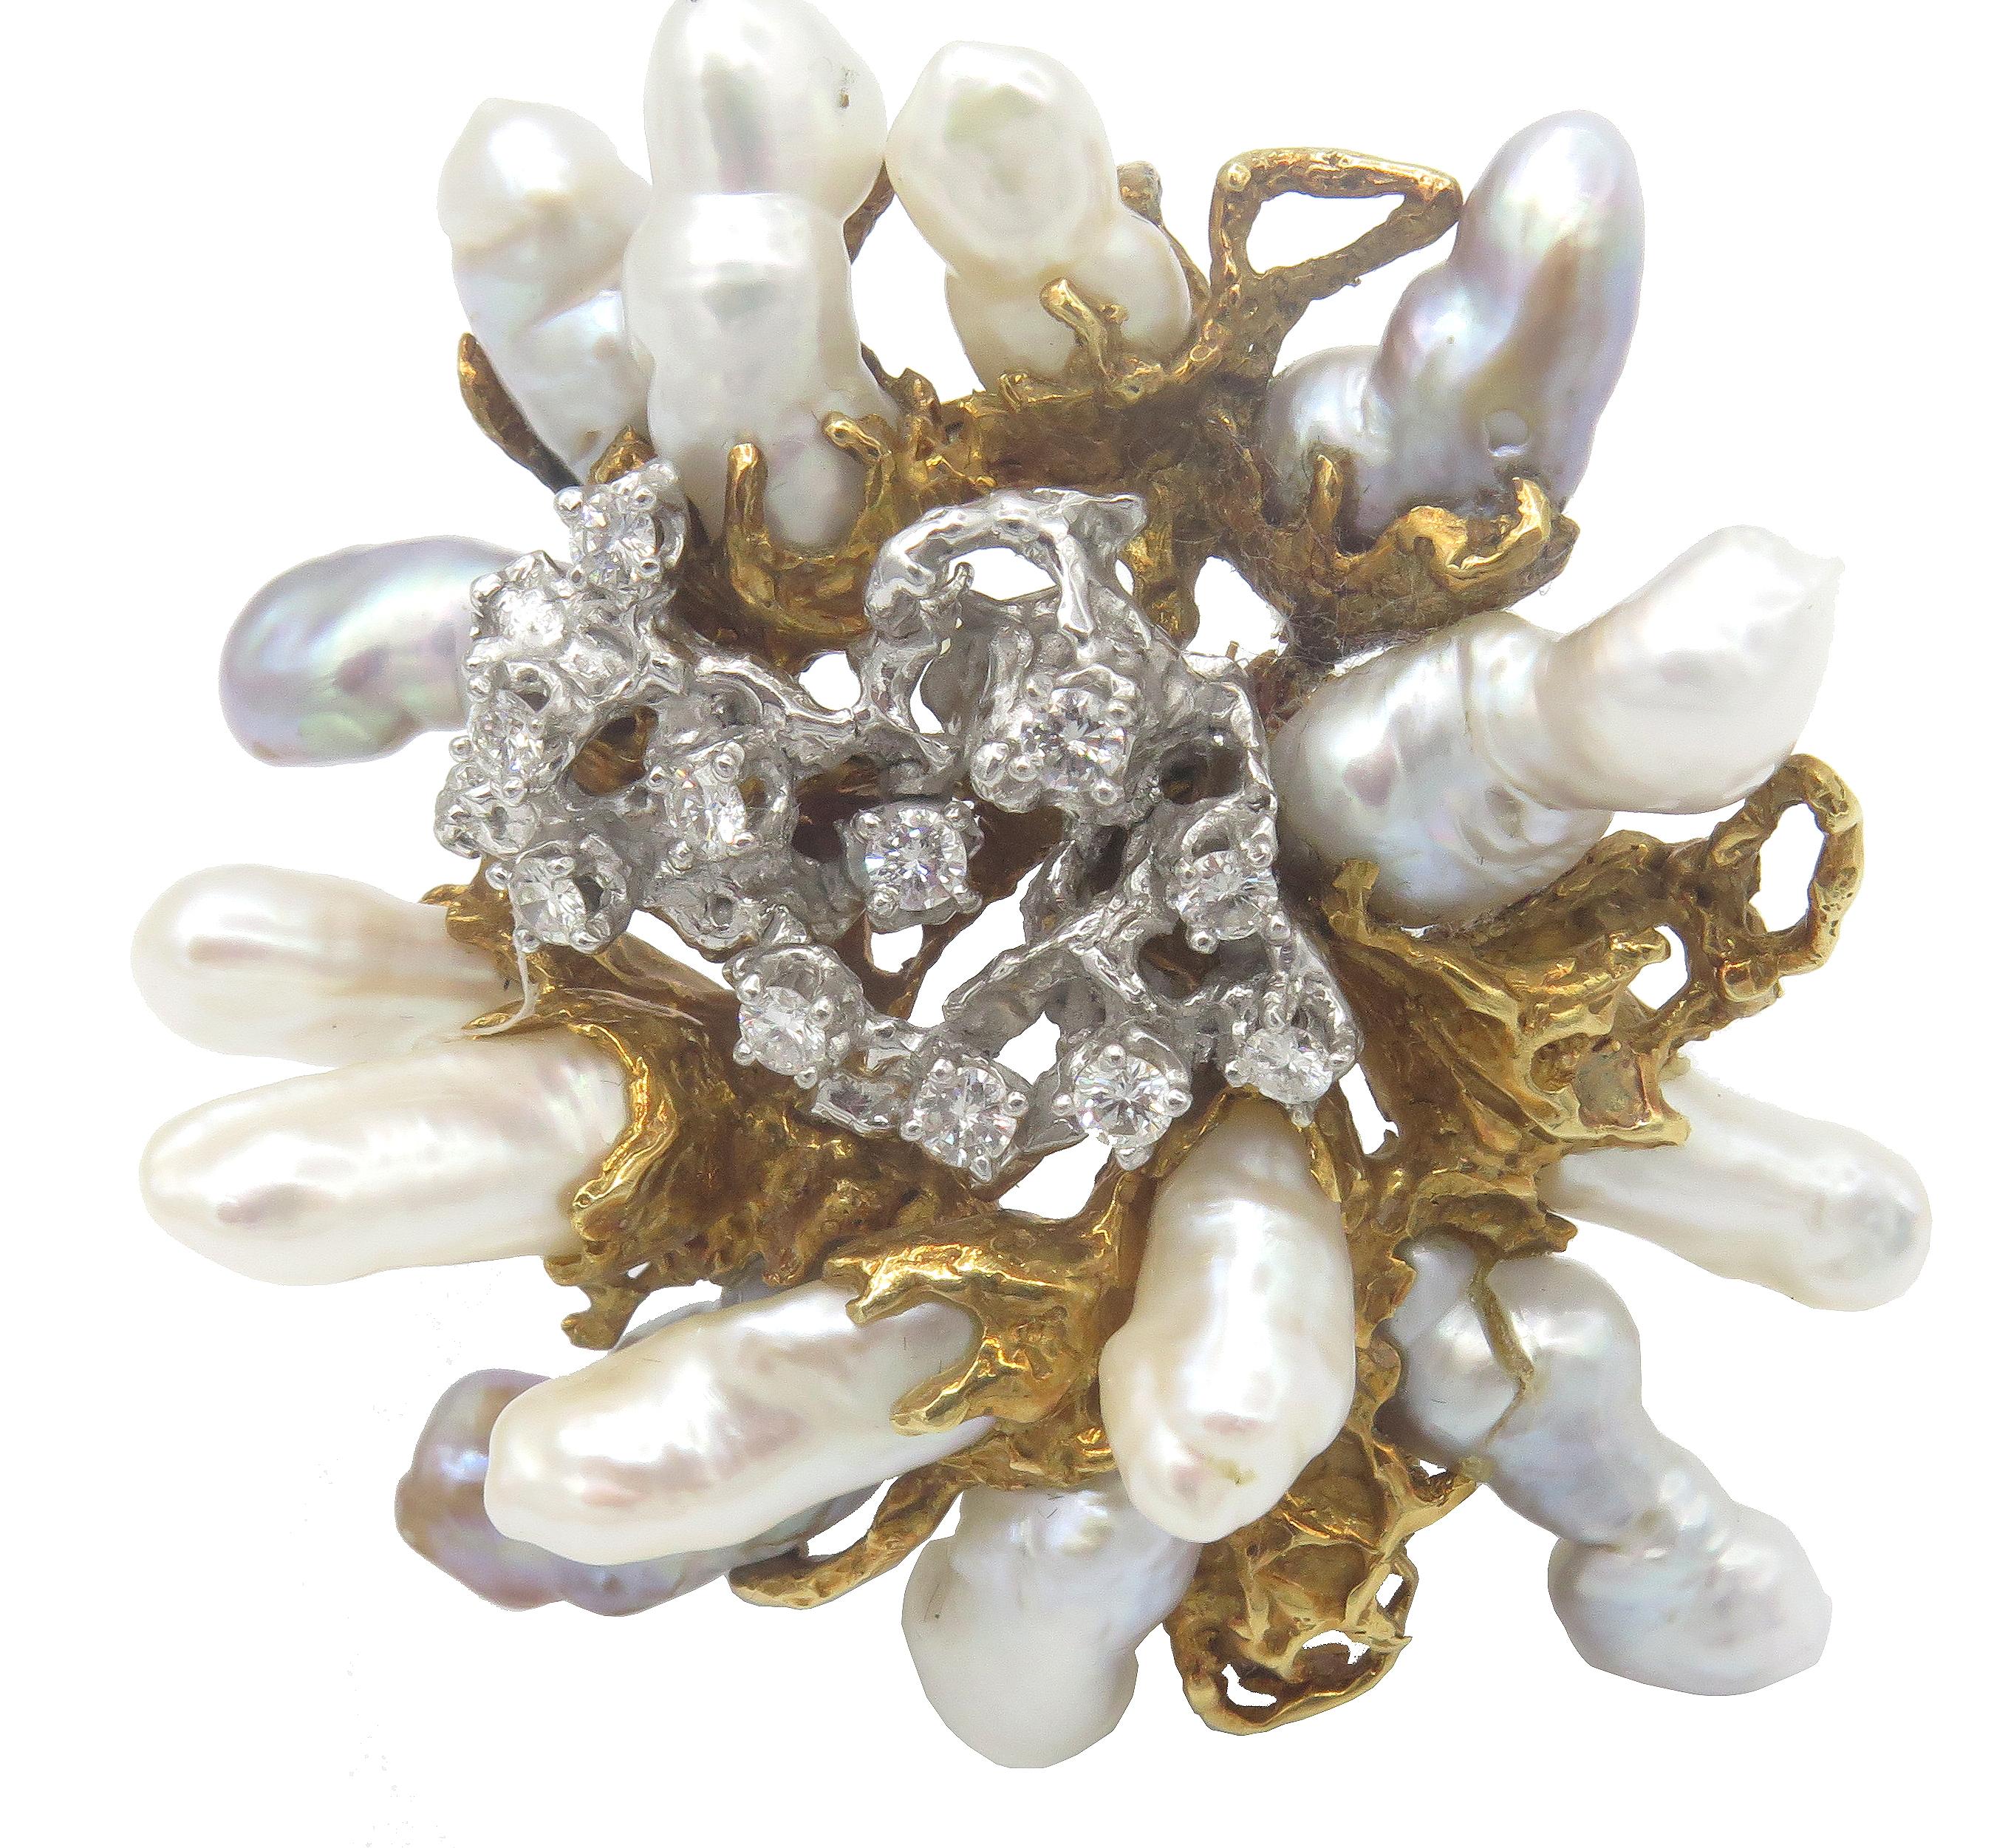 This exceptional freeform brooch designed by famed jewelry designer Arthur King artfully combines beautiful and lustrous Japanese Biwa pearls set in 18 karat yellow gold and diamonds scattered in a mass of Freeform white gold. A truly iconic brooch